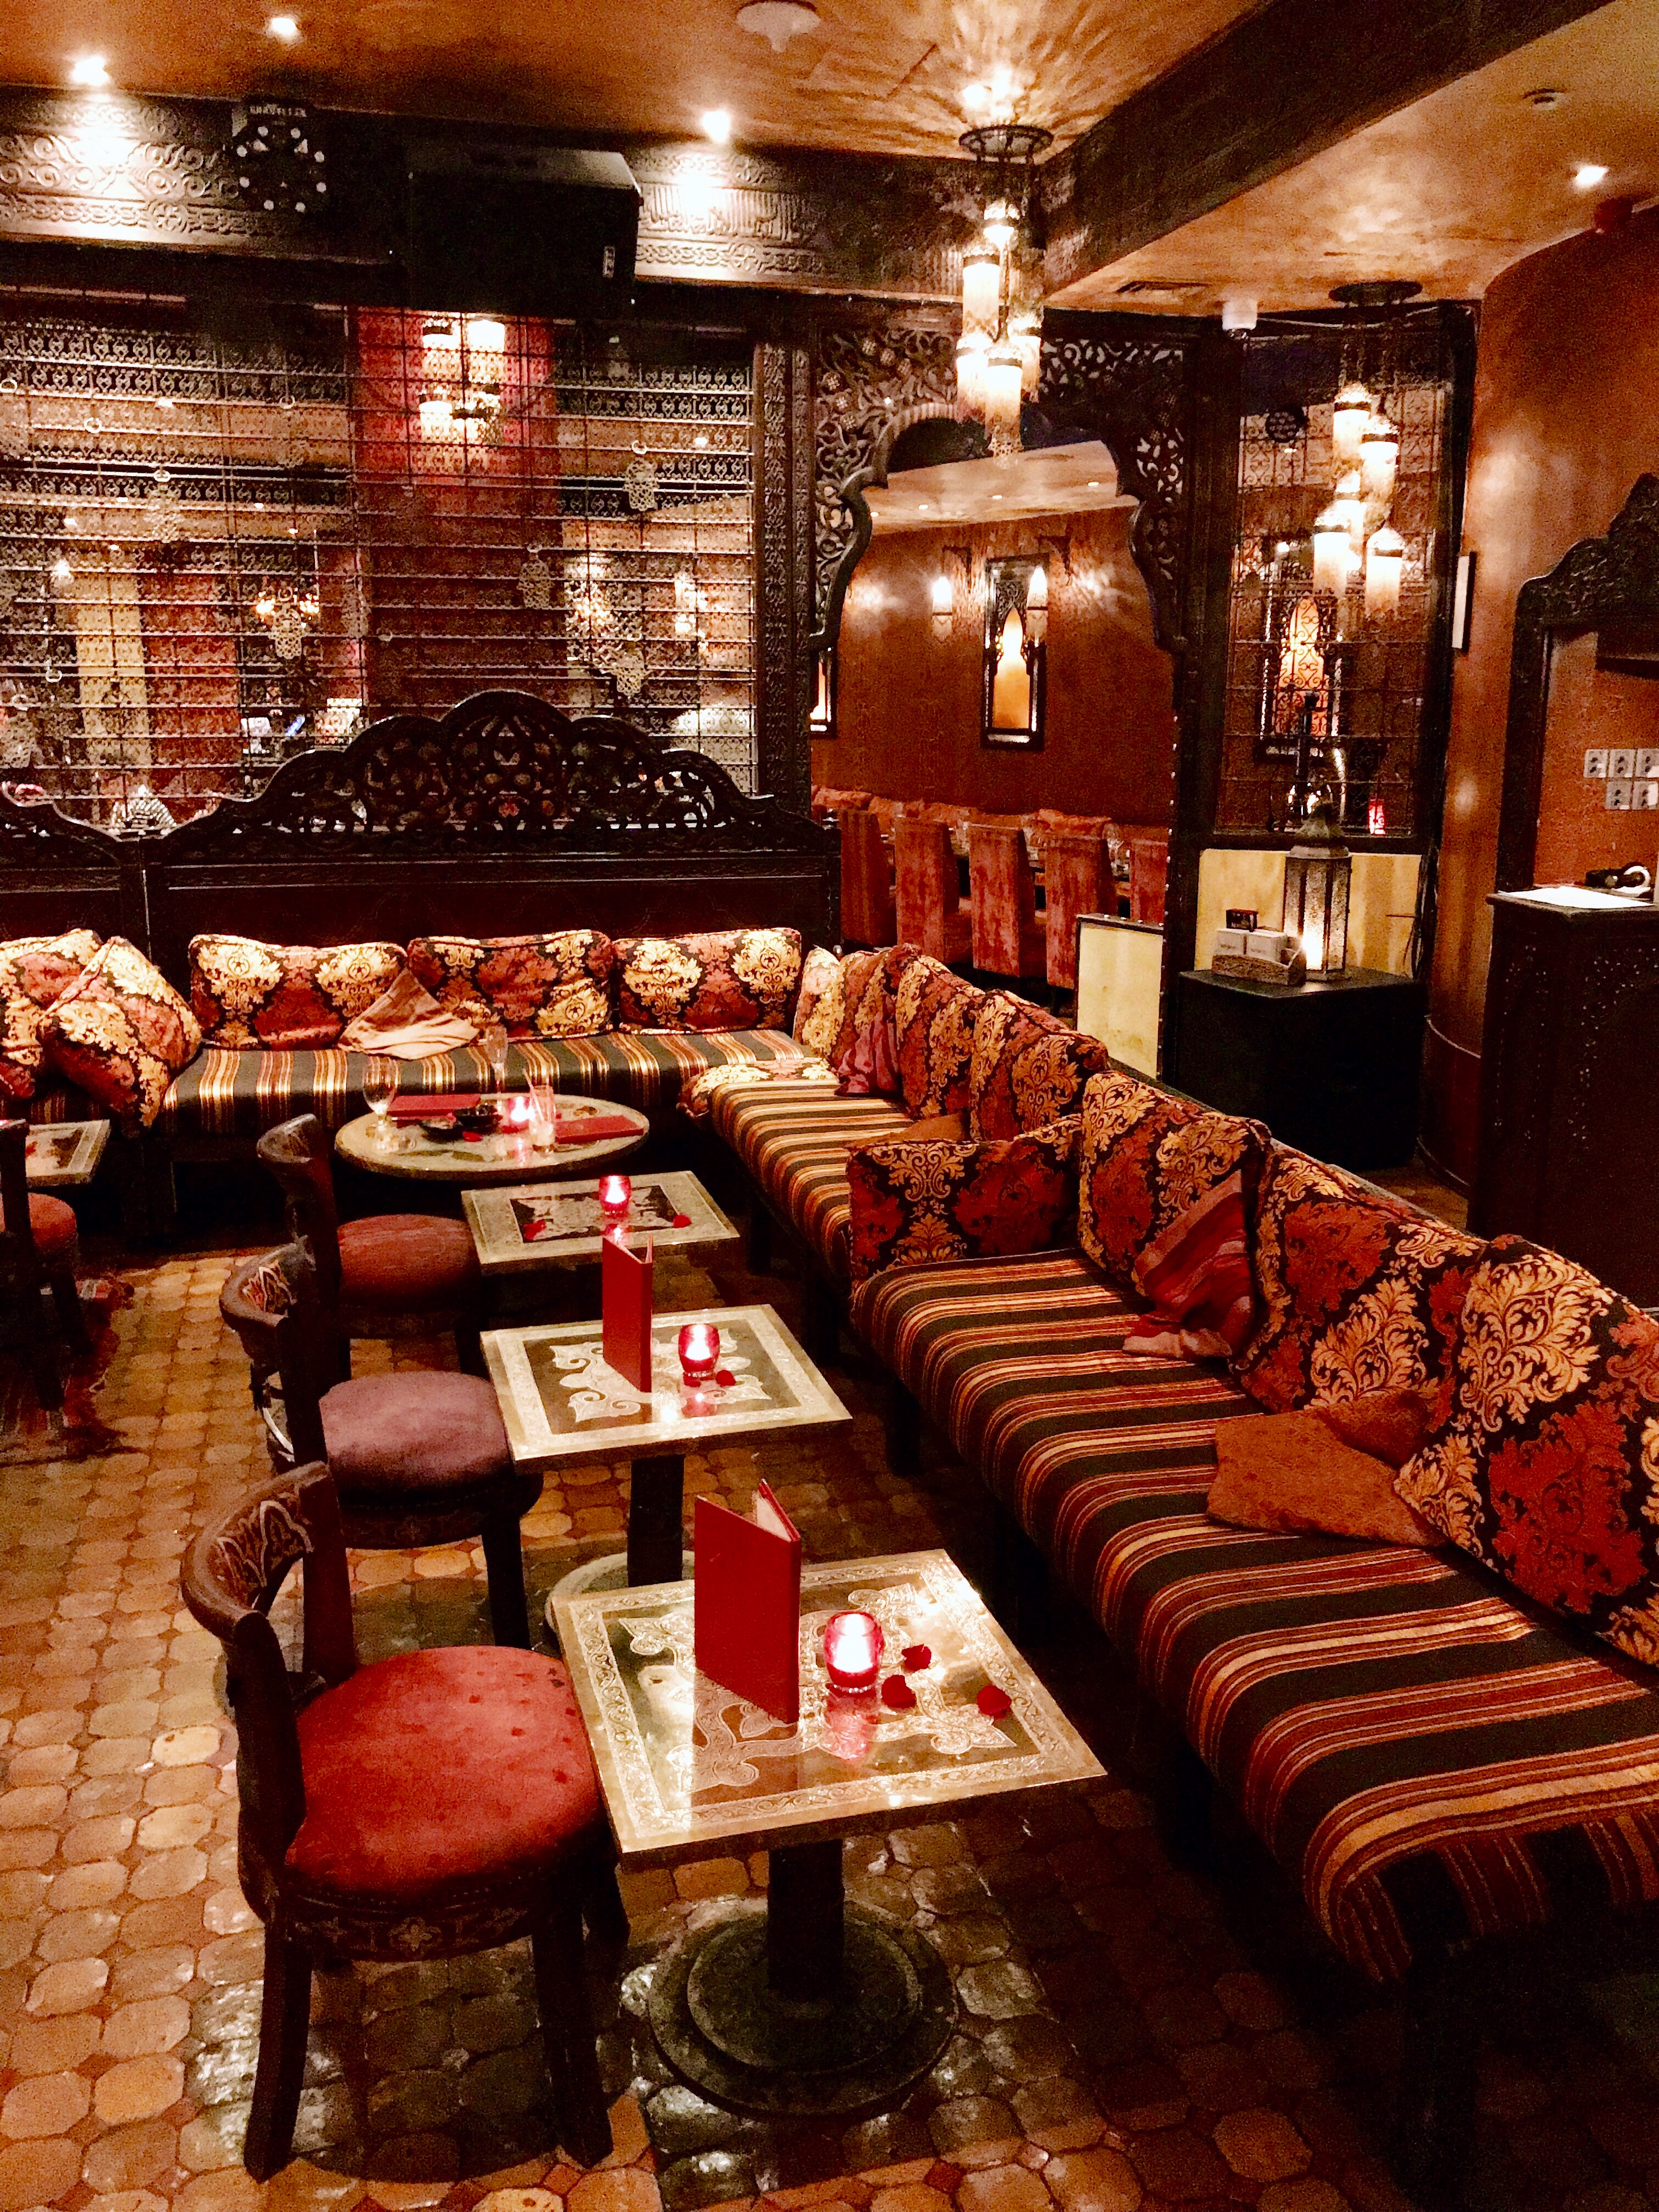 KENZA RESTAURANT AND LOUNGE IN LONDON Authentic home-style Lebanese and Middle-eastern cuisine